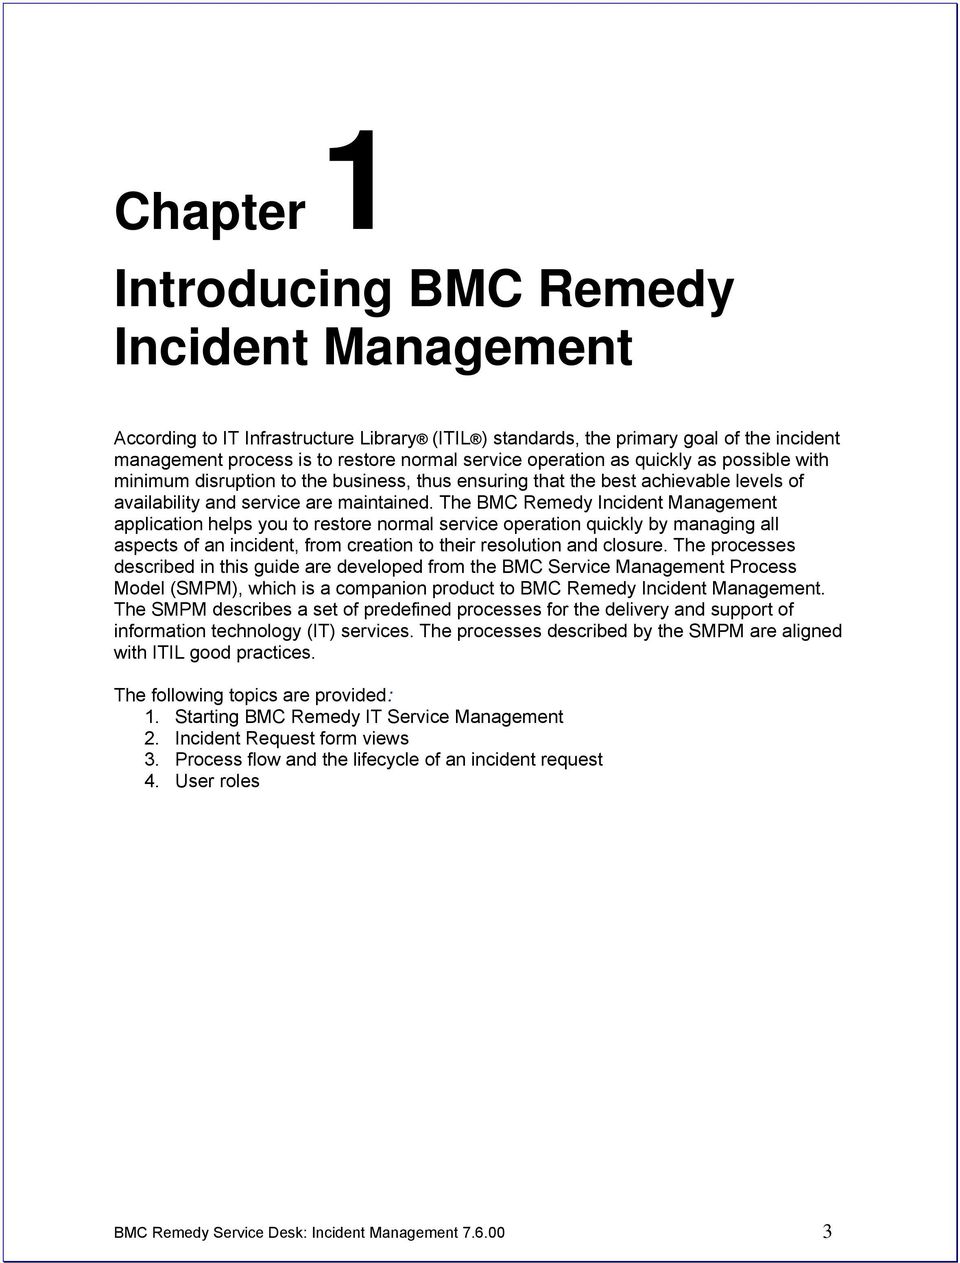 The BMC Remedy Incident Management application helps you to restore normal service operation quickly by managing all aspects of an incident, from creation to their resolution and closure.